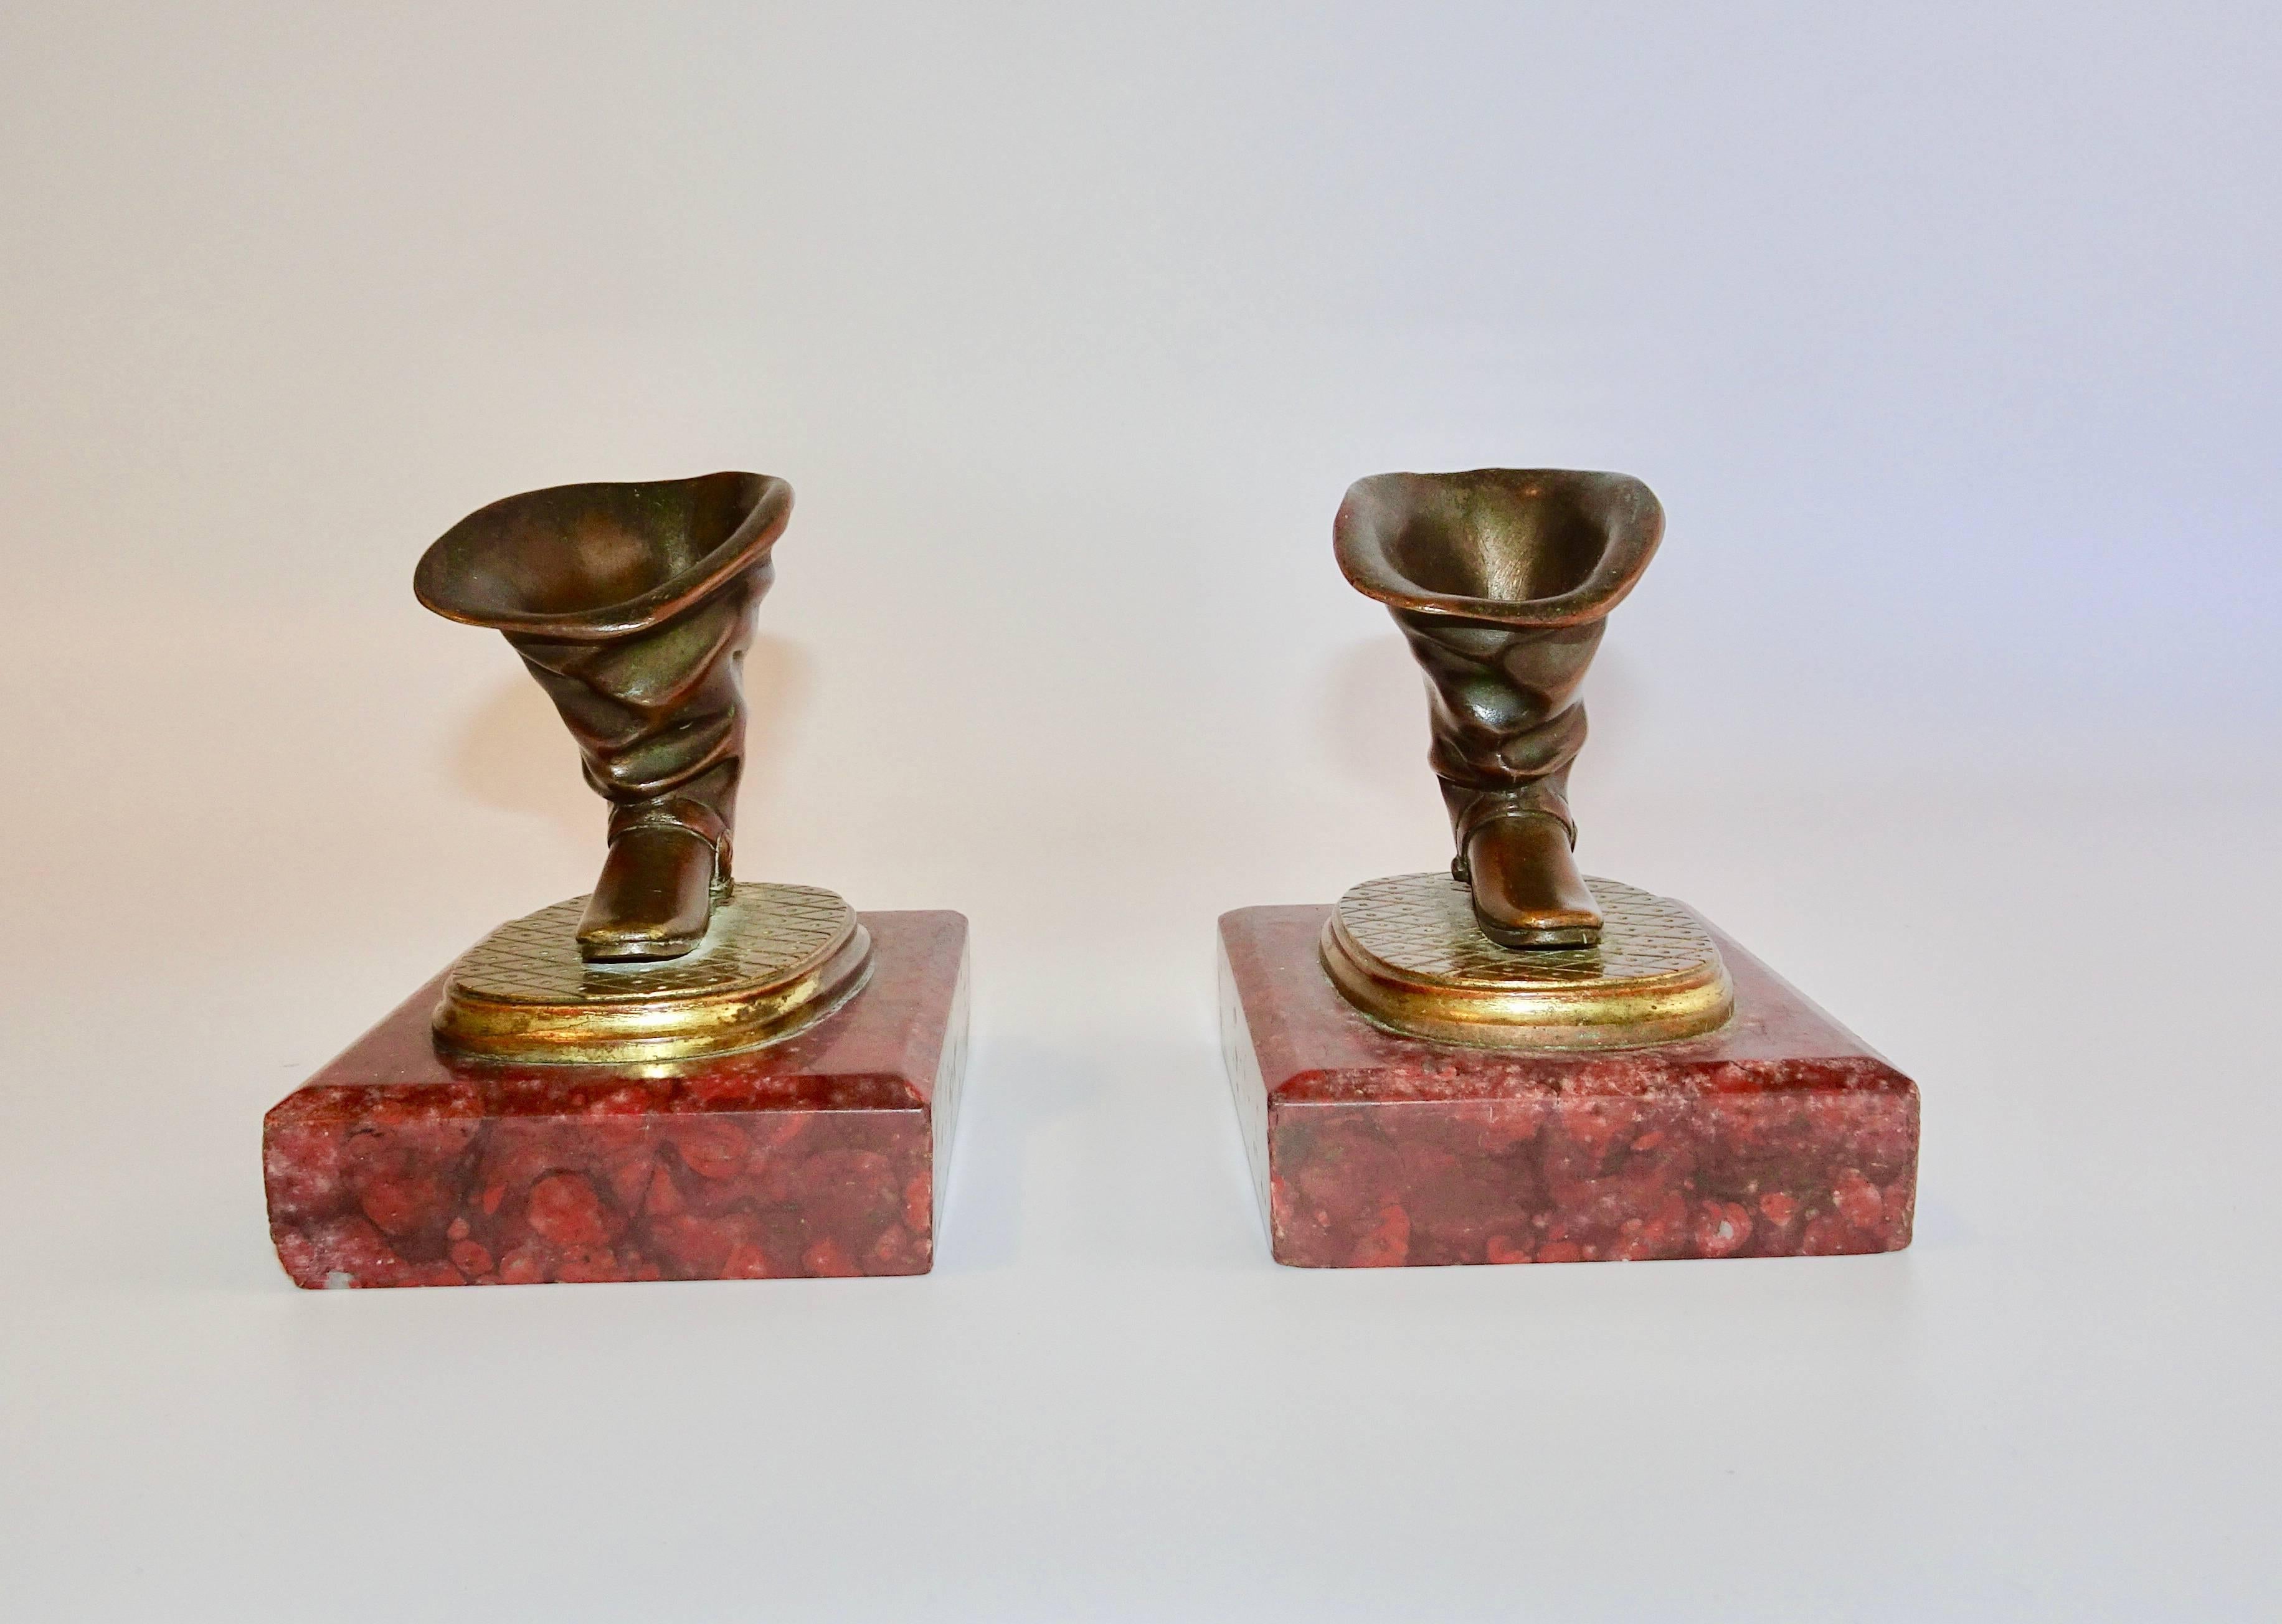 This very unusual pair of 19th century Charles X gilt and metal quill holders are in the shape of boots with spurs. They are mounted on beautiful dark red marble plinths. They make quite the conservation piece on a desk.